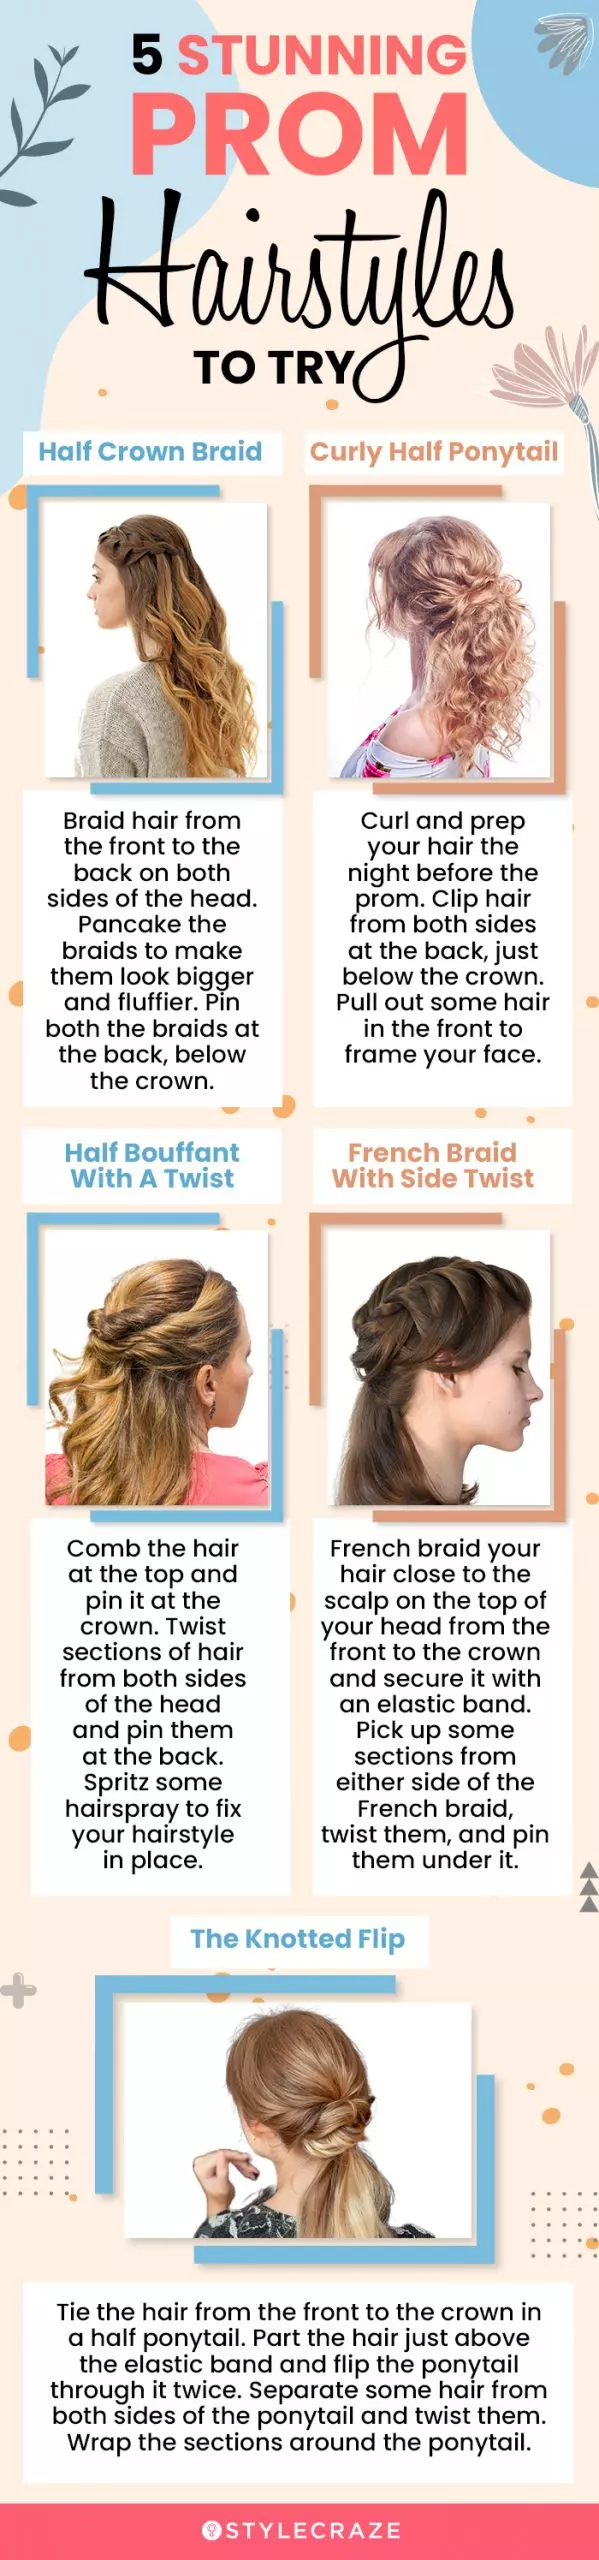 5 stunning prom hairstyles to try (infographic)